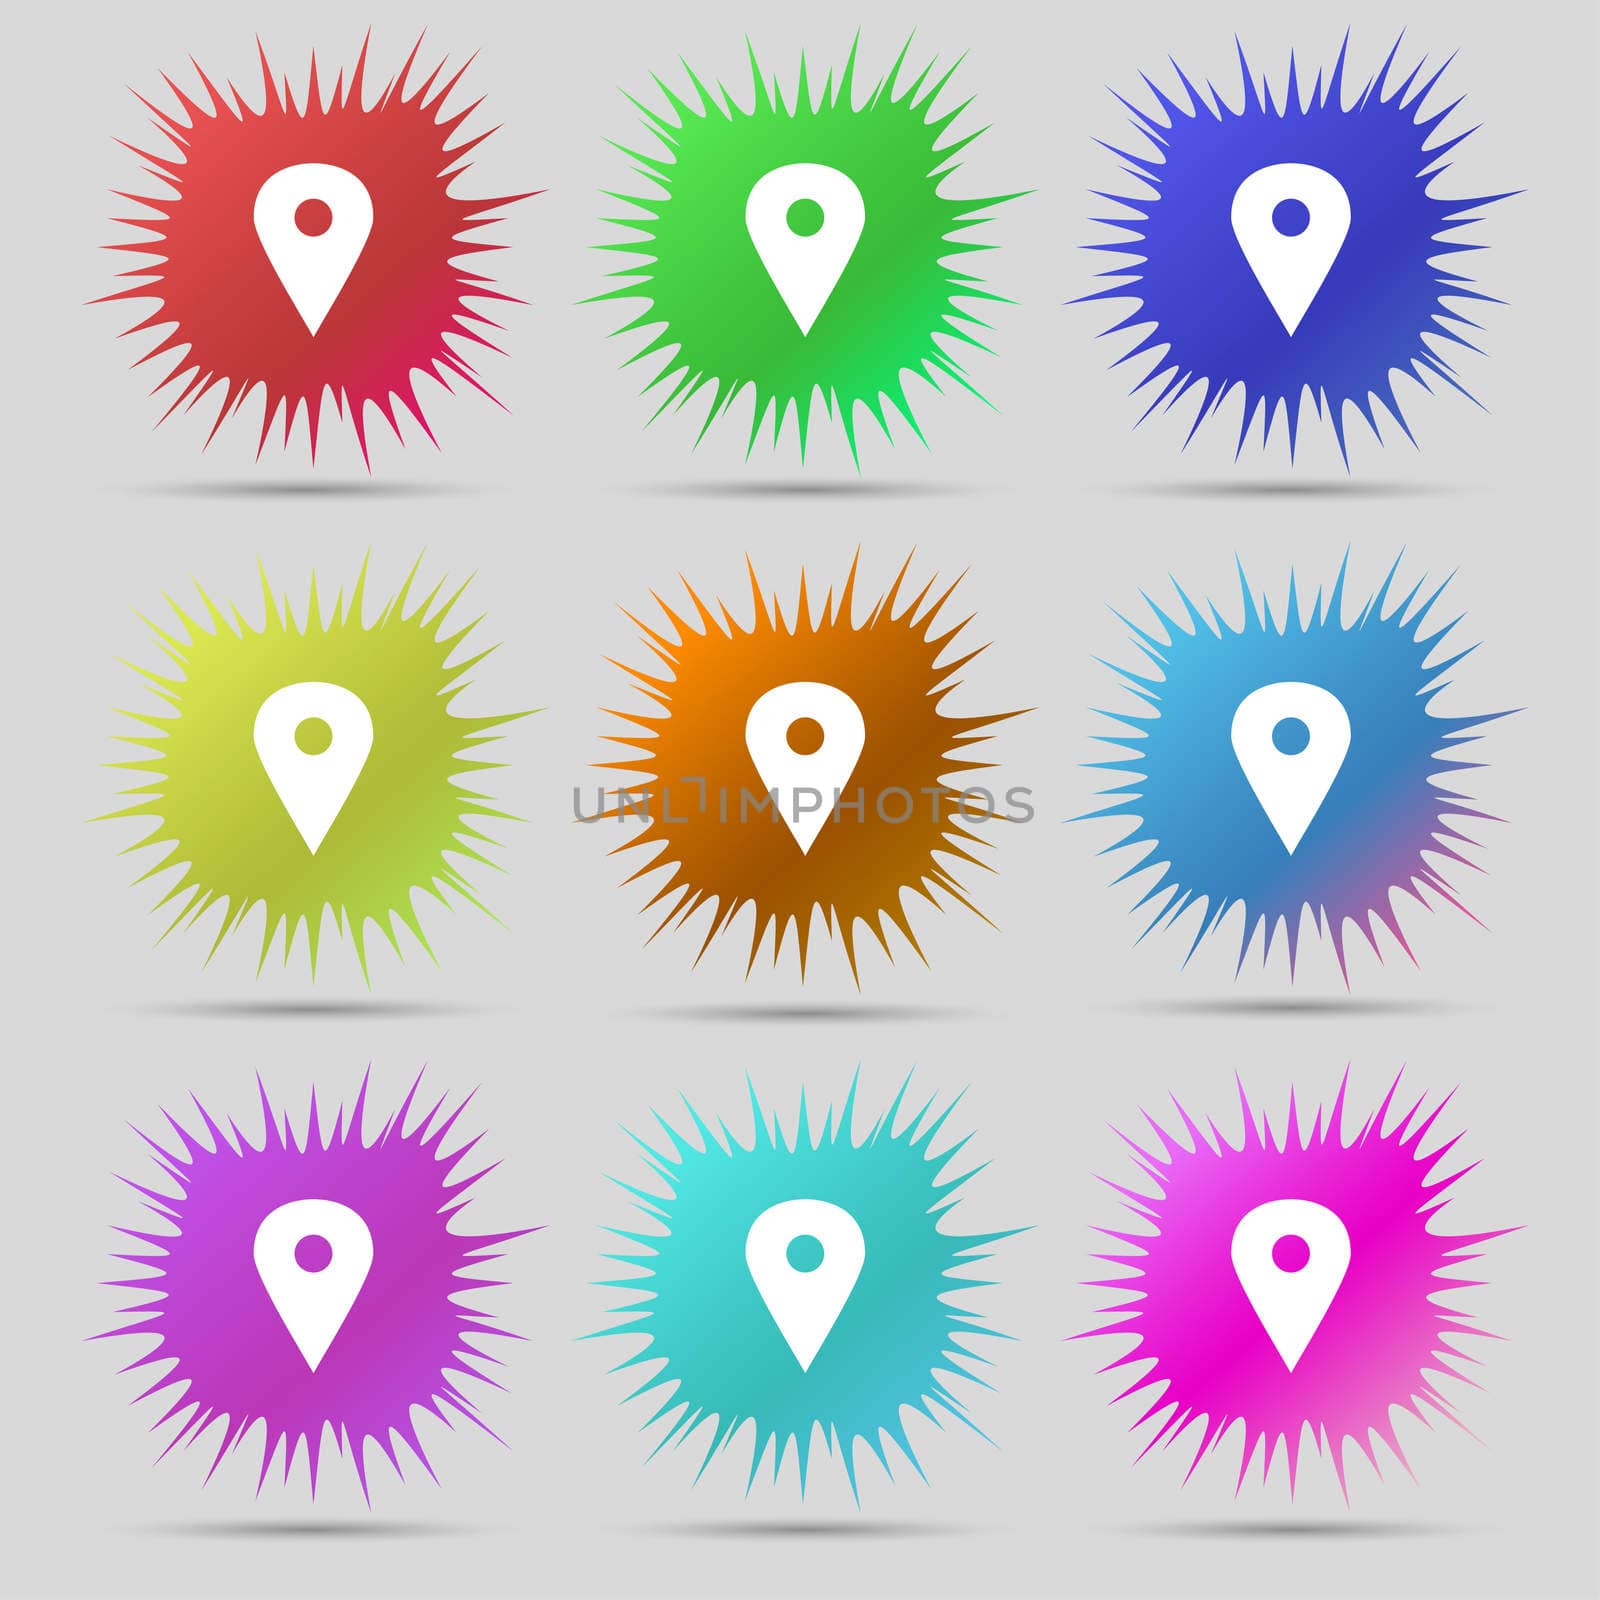 Map pointer, GPS location icon sign. A set of nine original needle buttons. illustration